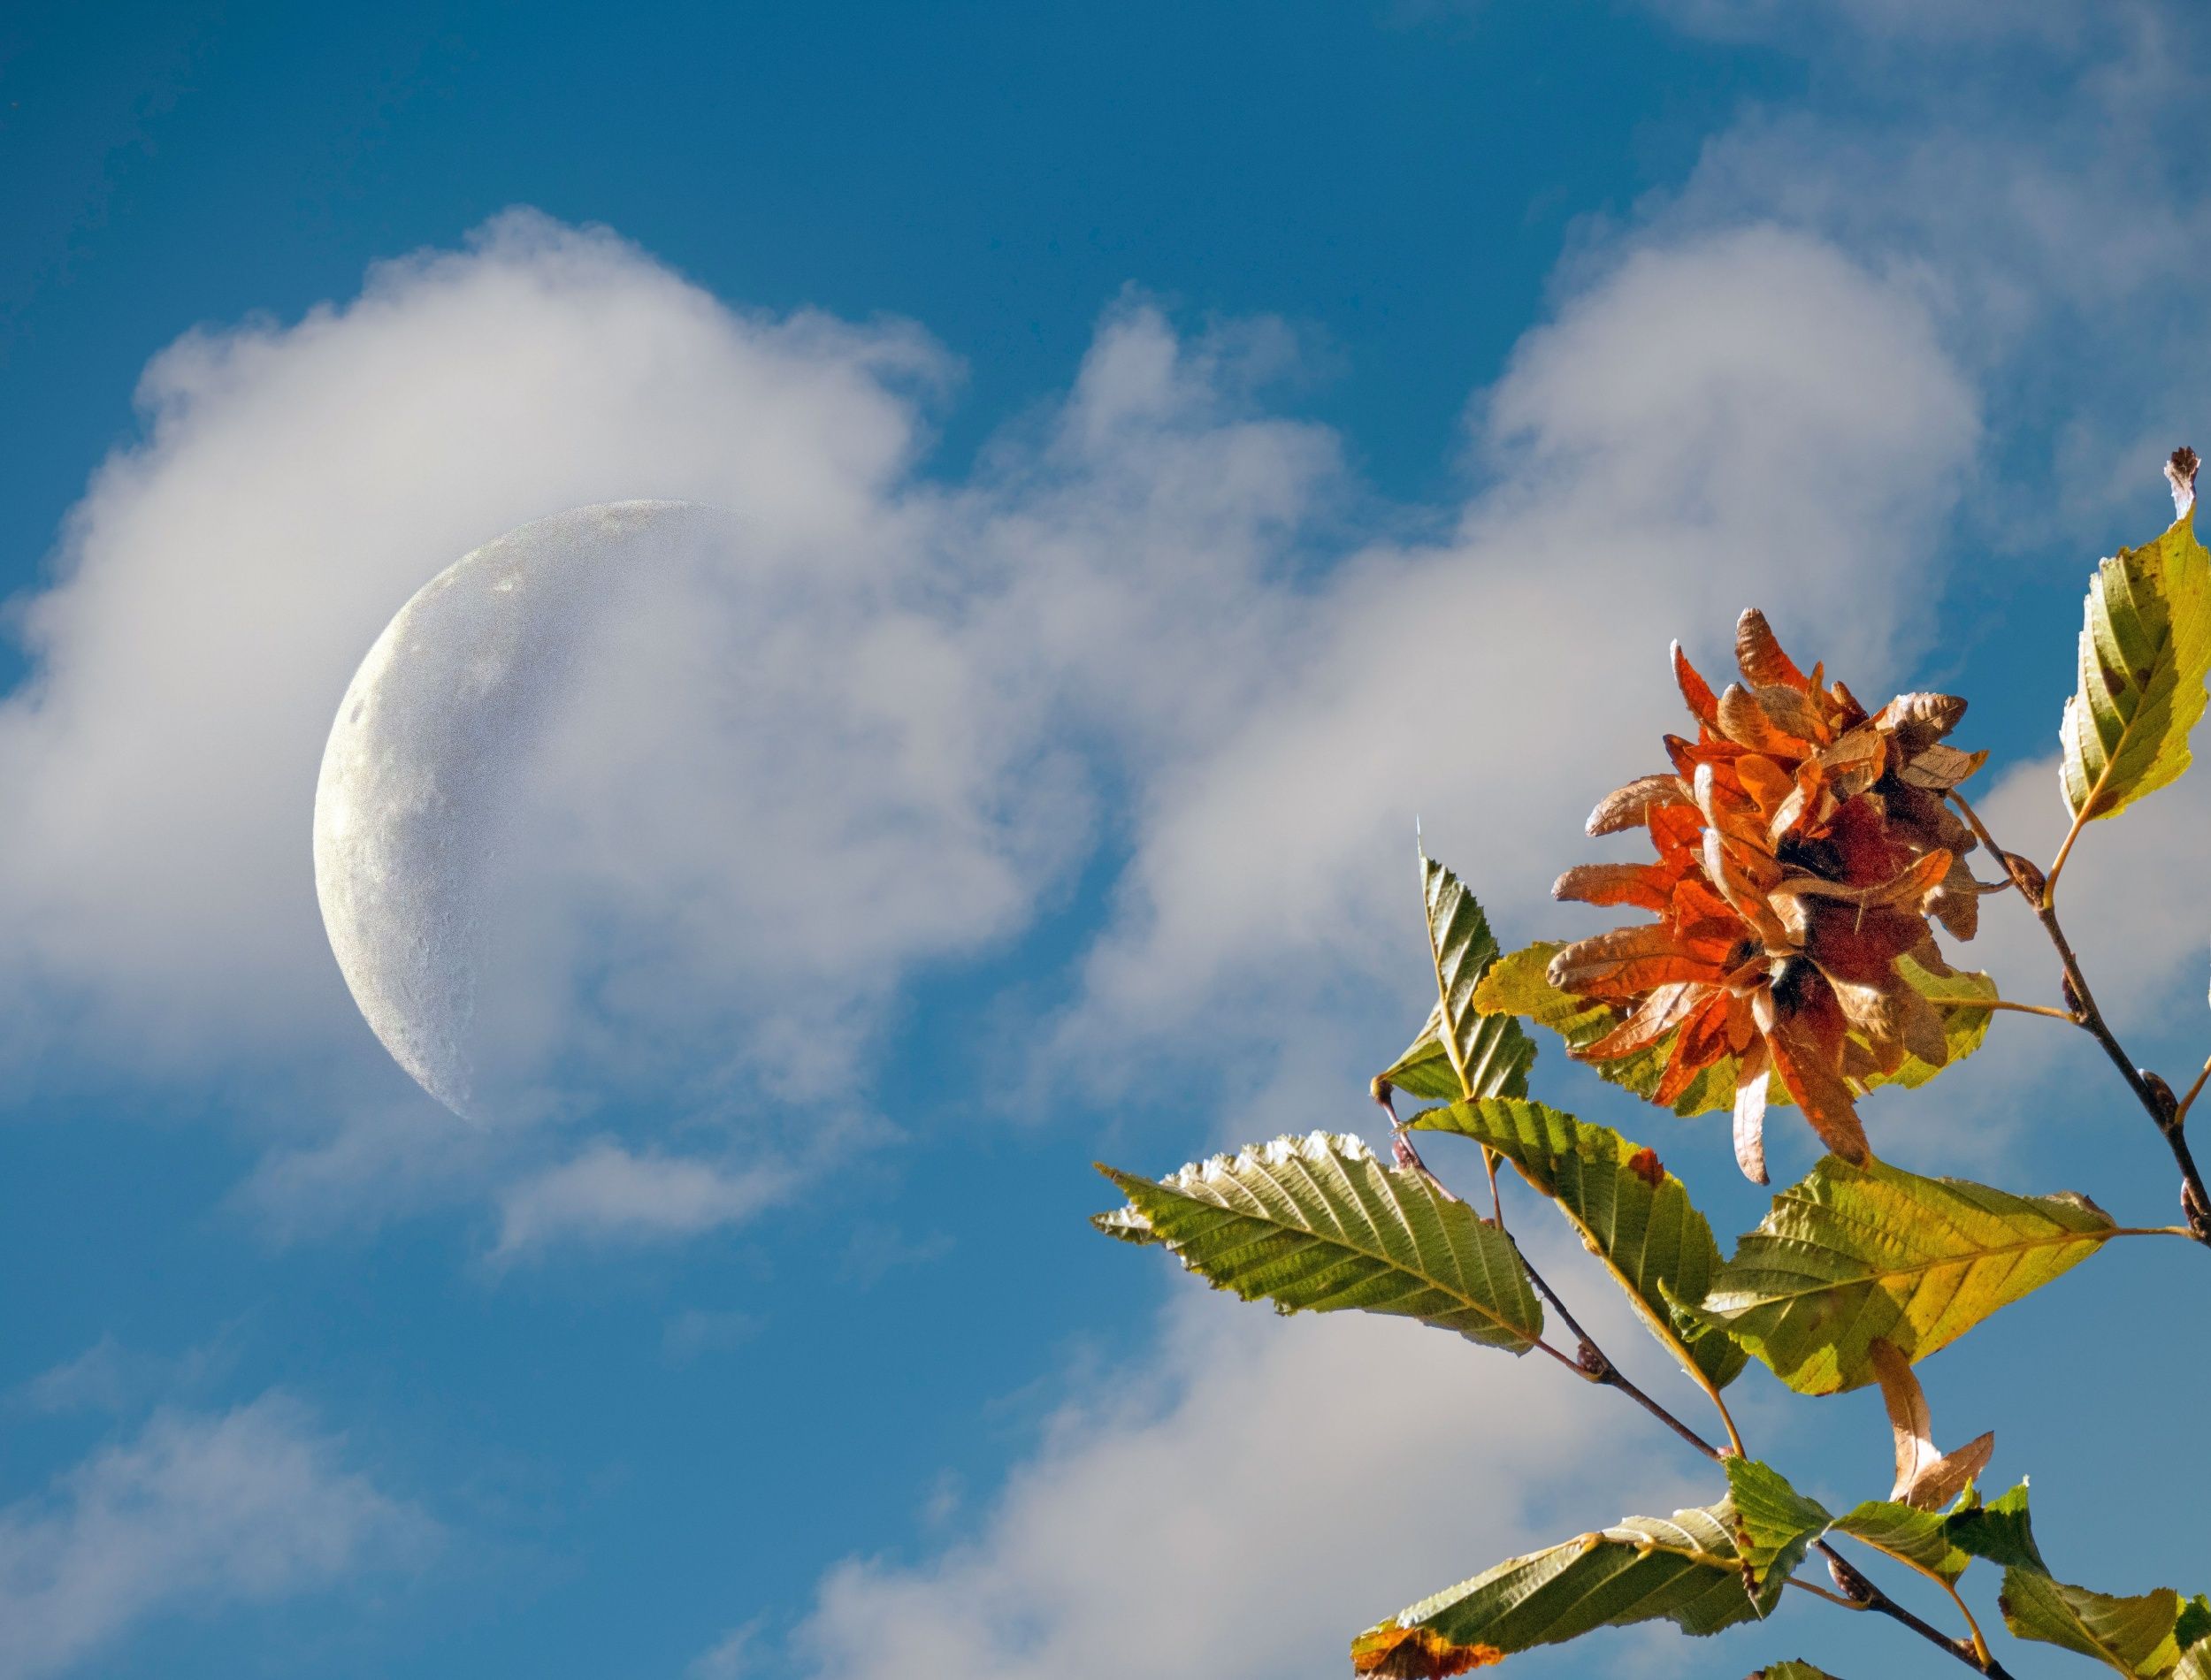 Gardening by the phases of the moon